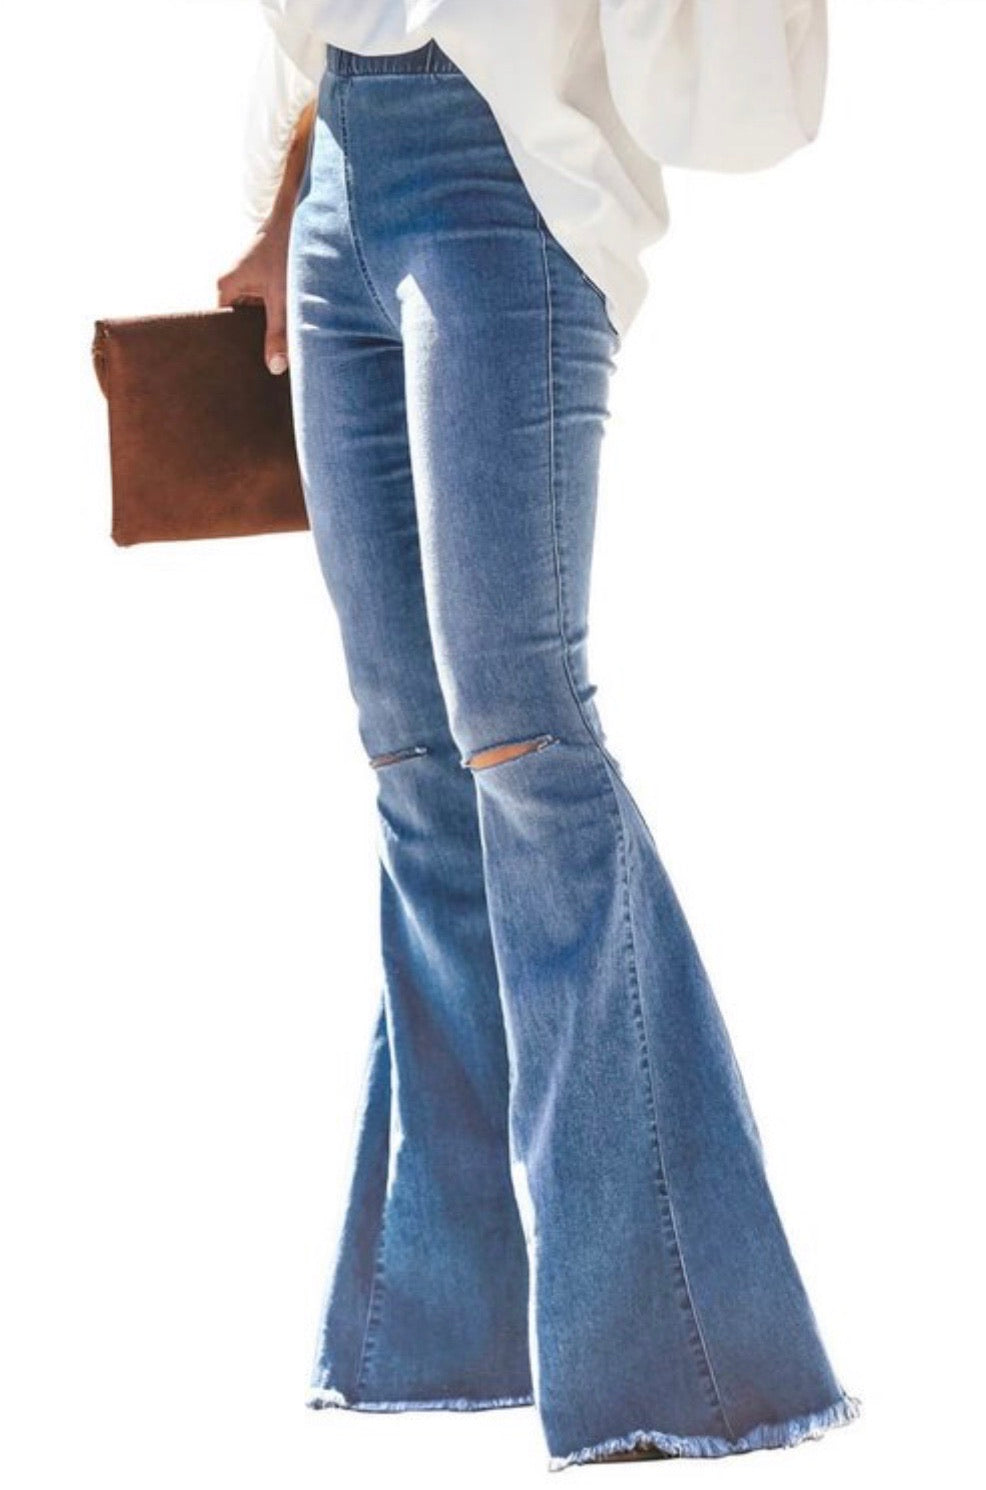 Lola Distressed Medium Wash Bell Bottom Jeans - Corinne Boutique Family Owned and Operated USA